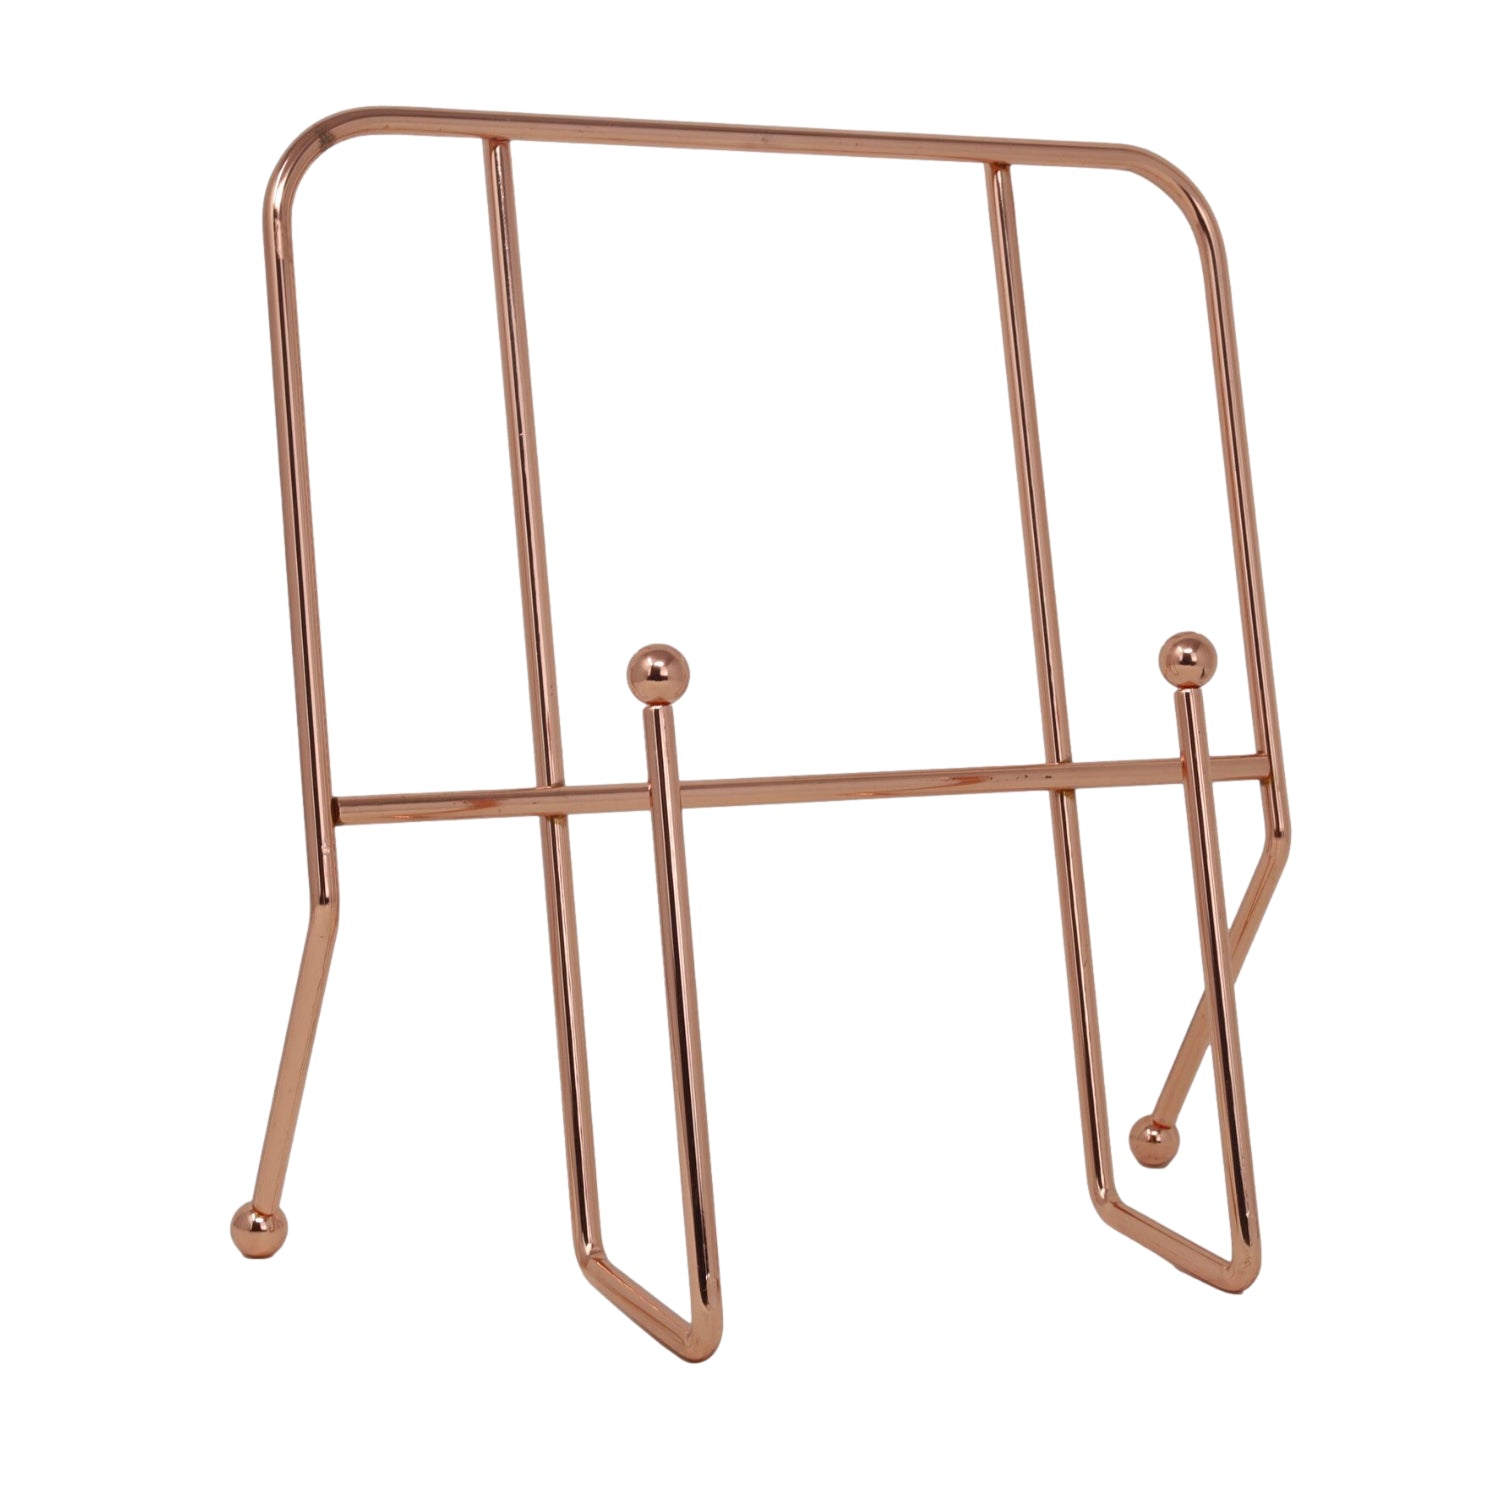 Metal Copper Cook Book Stand Holder Display Stand